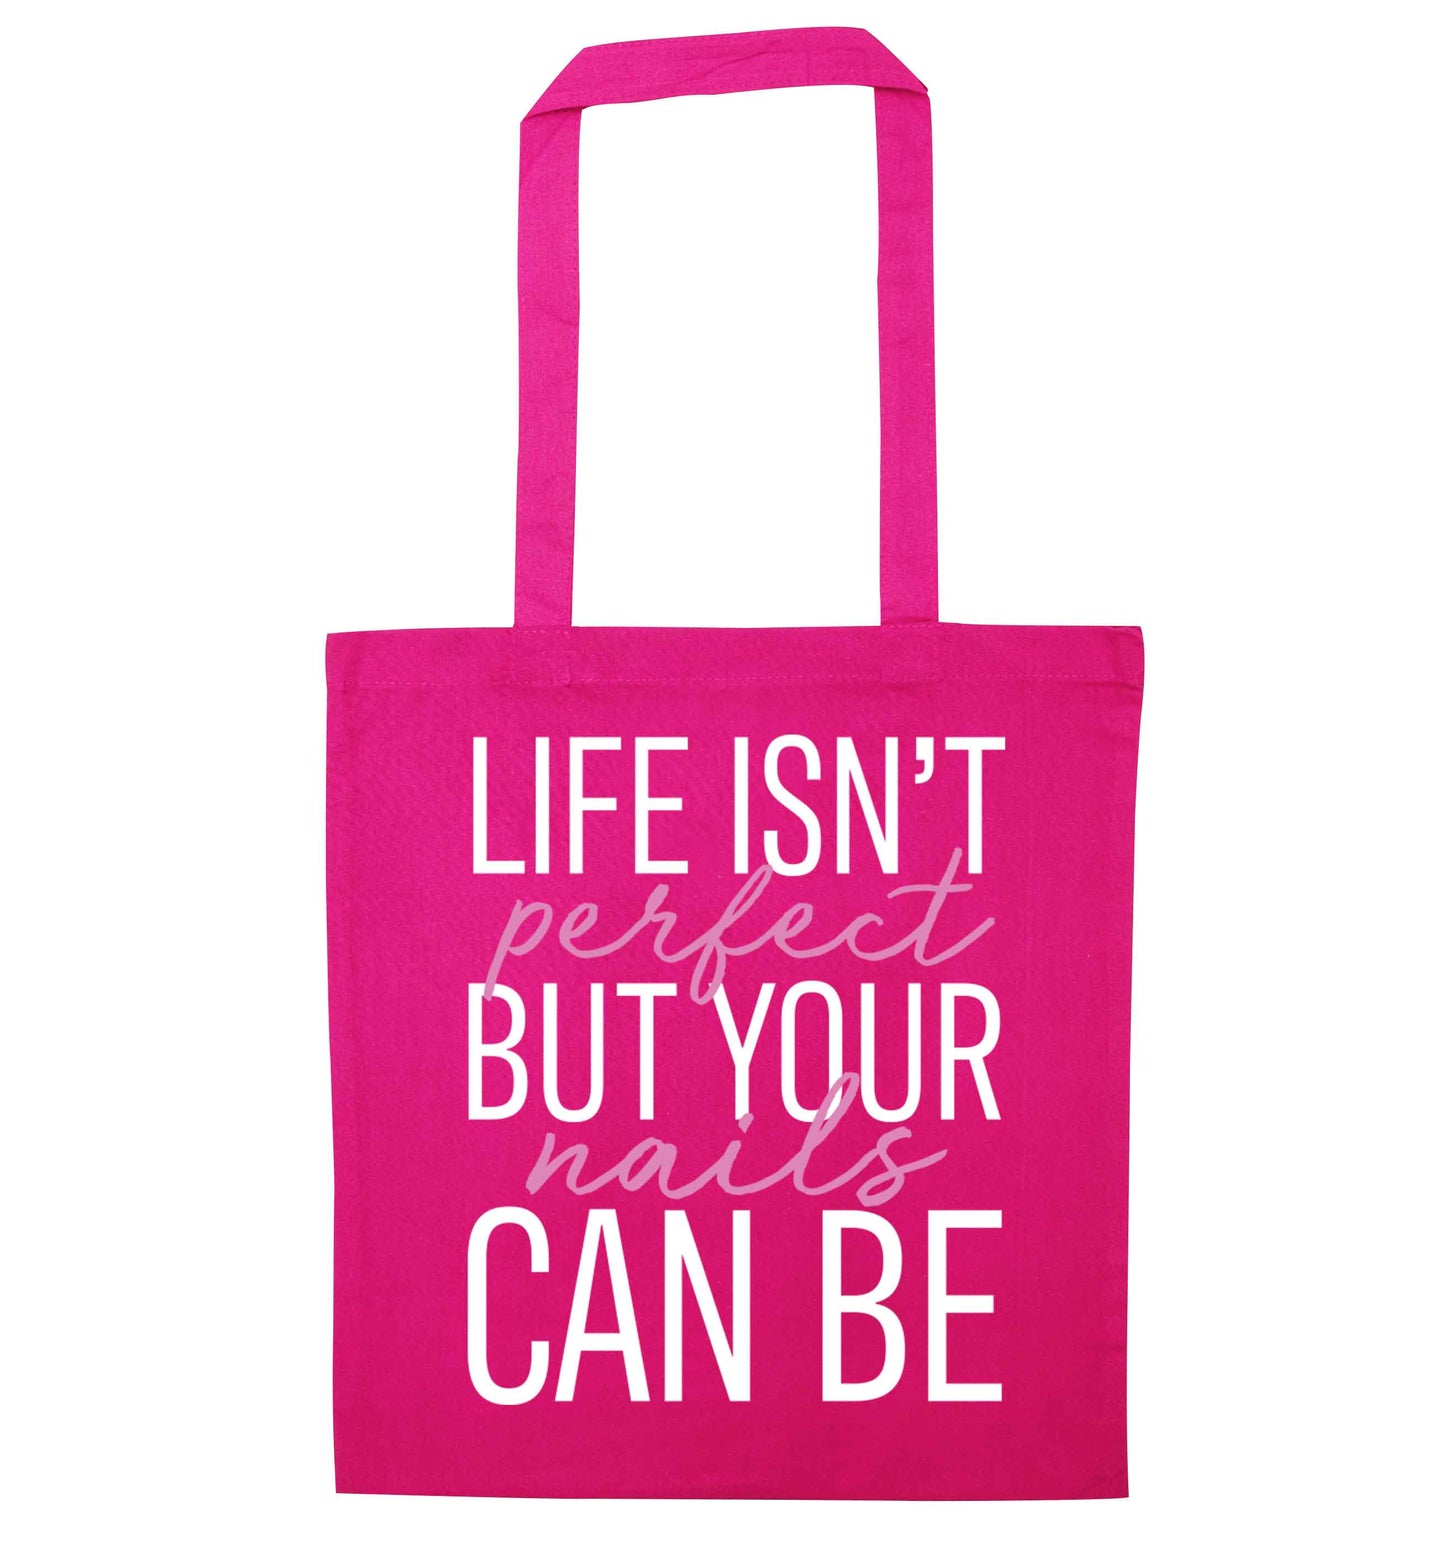 Life isn't perfect but your nails can be pink tote bag